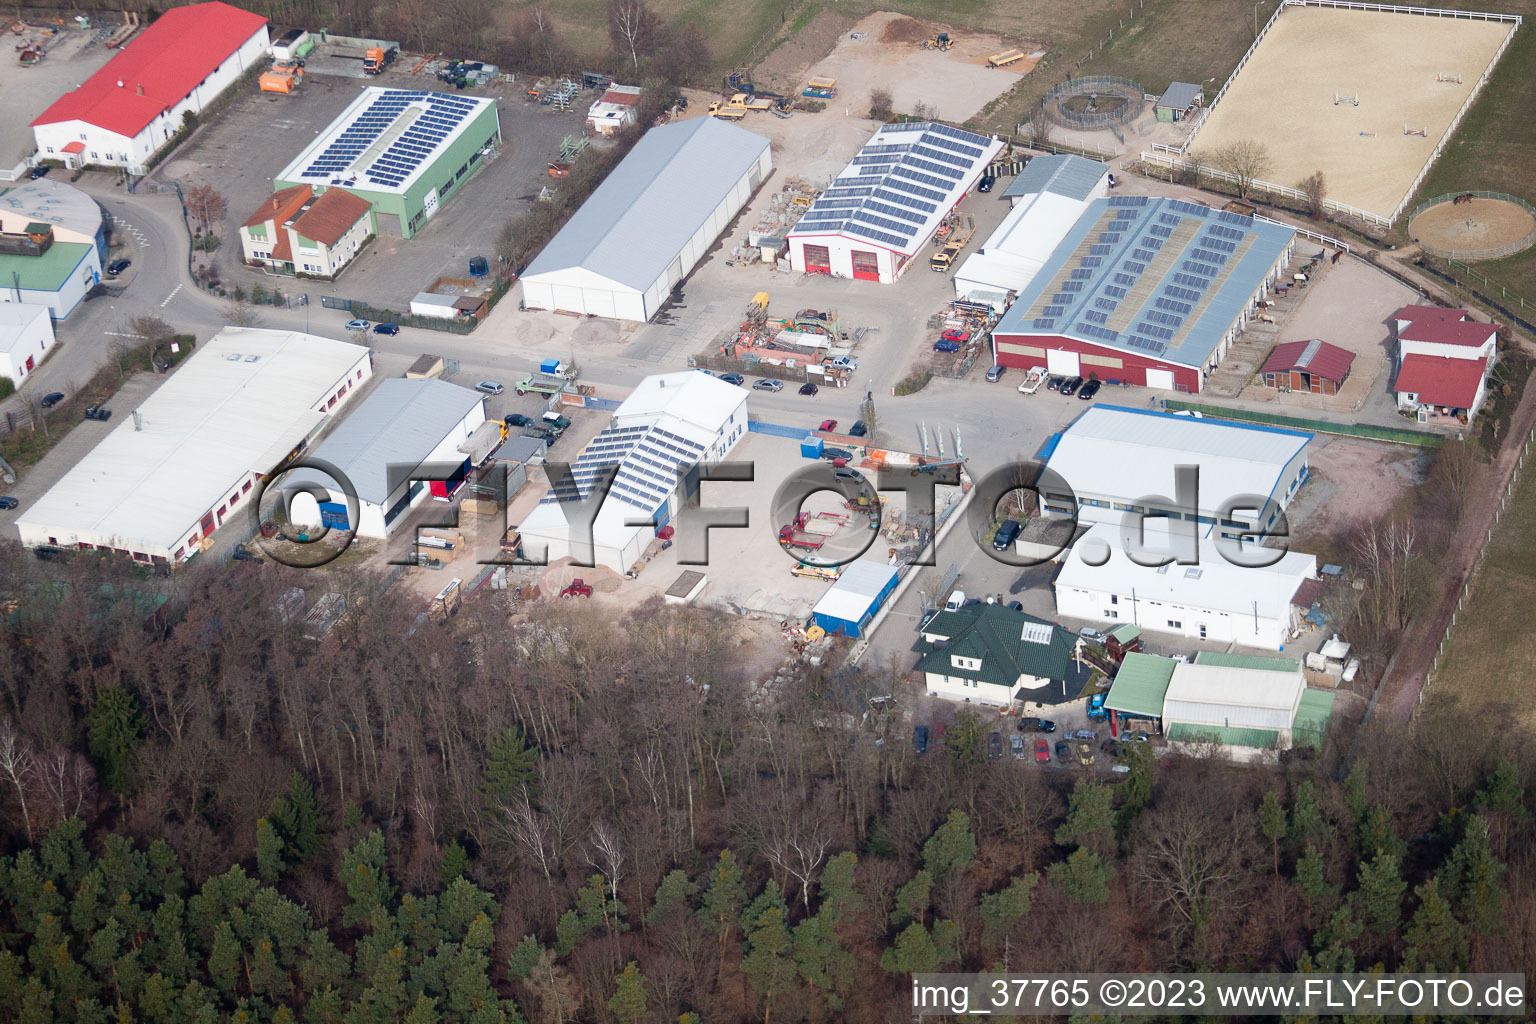 Gäxwald industrial area in the district Herxheim in Herxheim bei Landau/Pfalz in the state Rhineland-Palatinate, Germany from the drone perspective